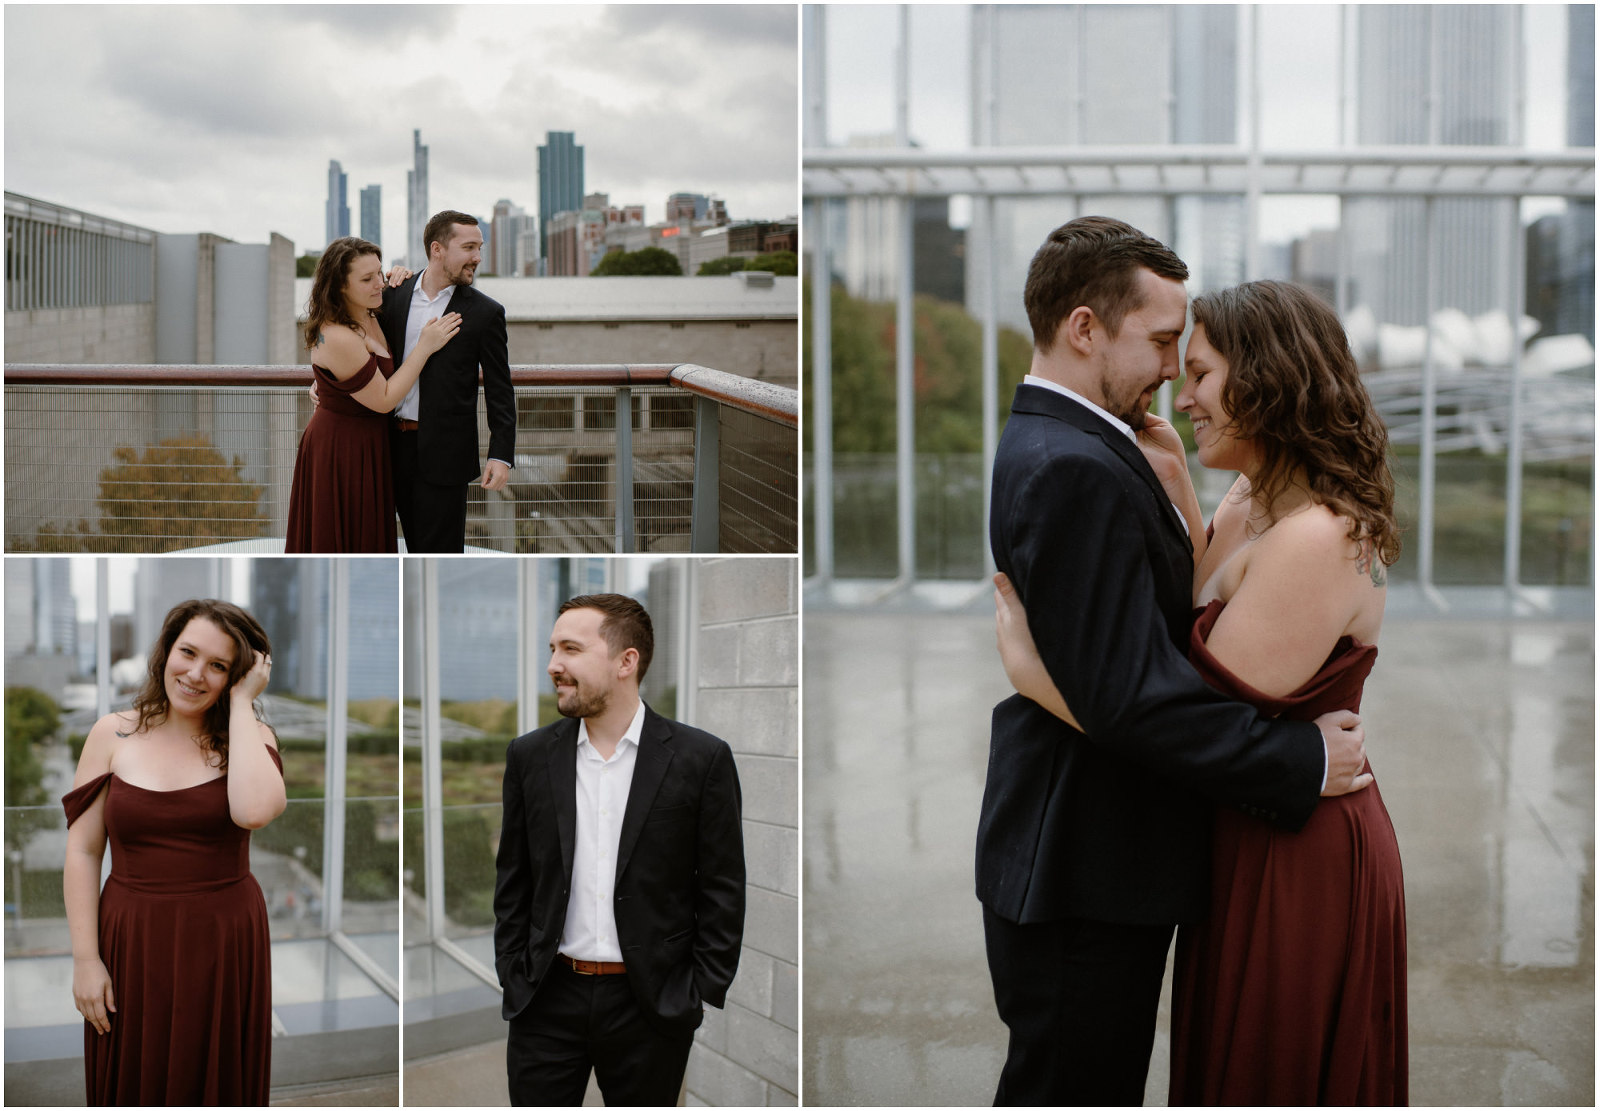 Engagement session at Art Institute of Chicago